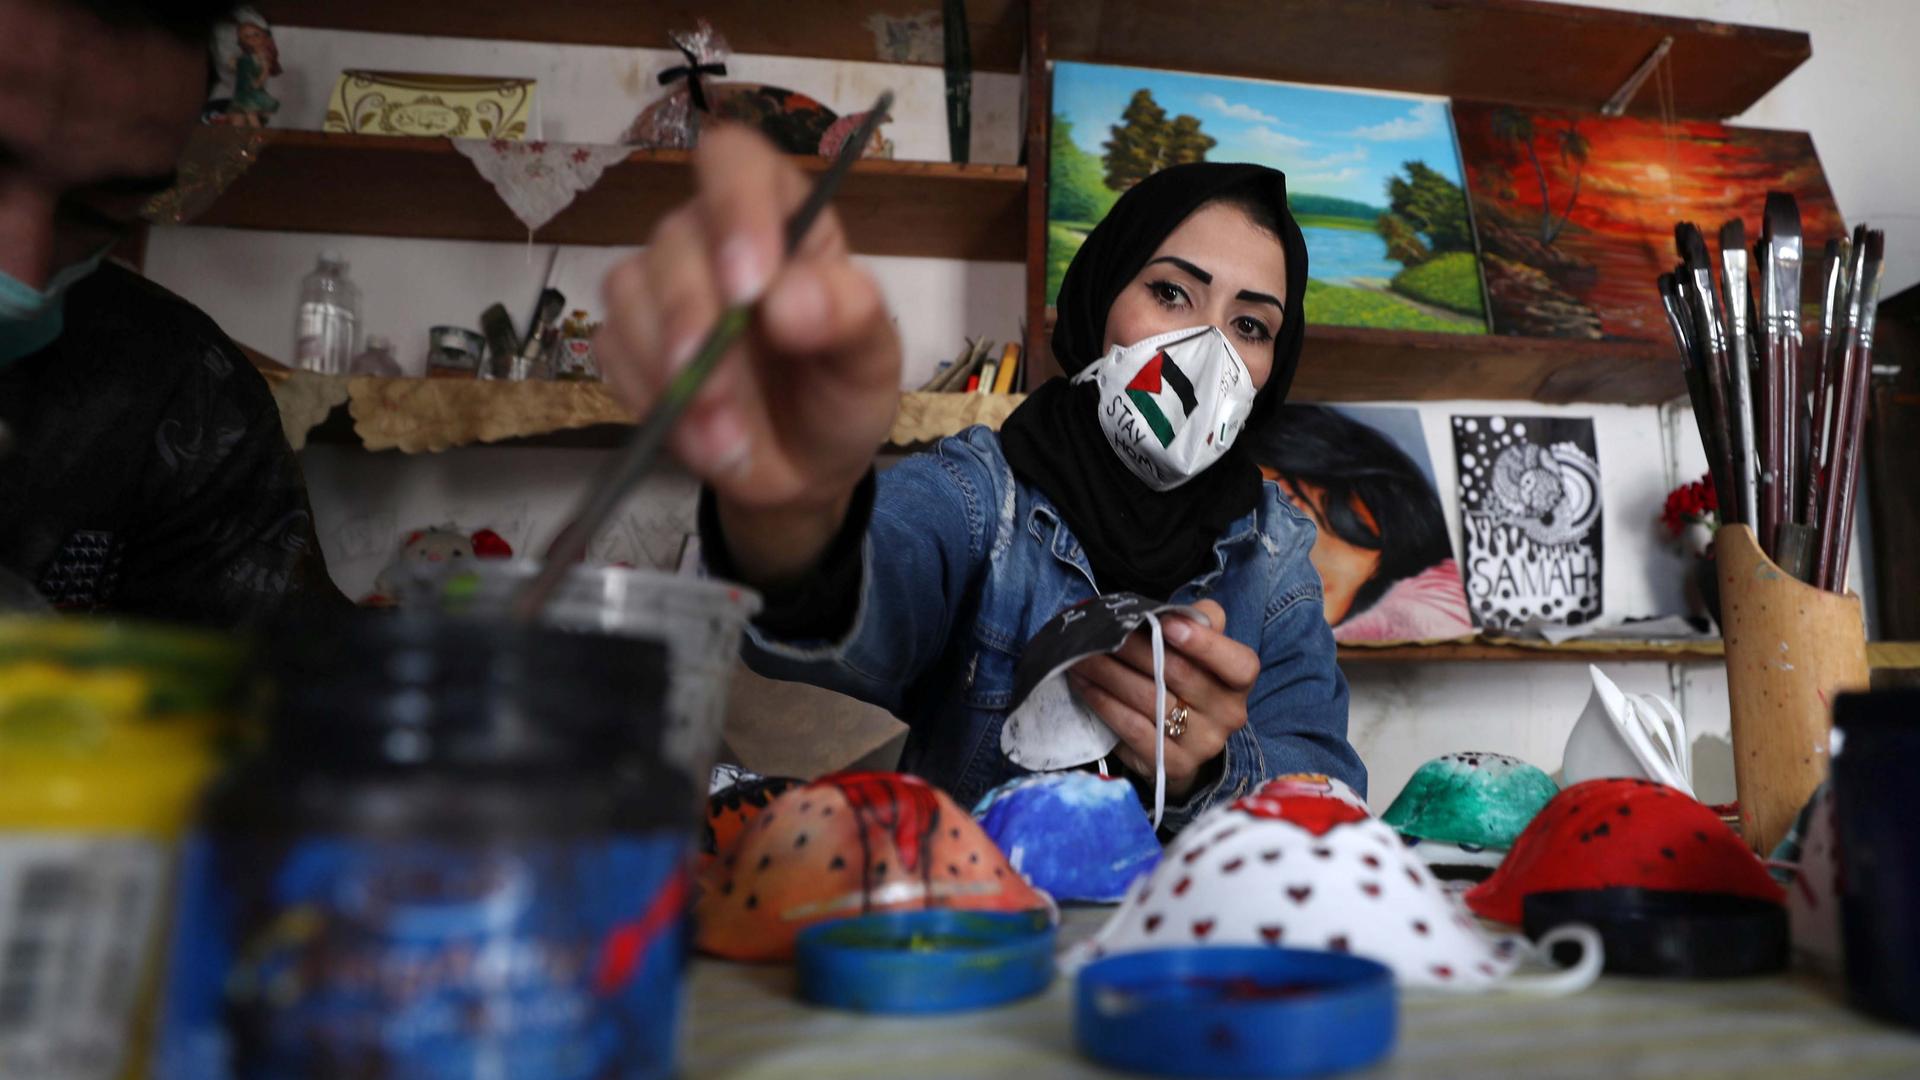 A Palestinian artist paints protective face masks to encourage people to wear them as a precaution against the coronavirus disease (COVID-19), in Gaza City, on March 30, 2020.